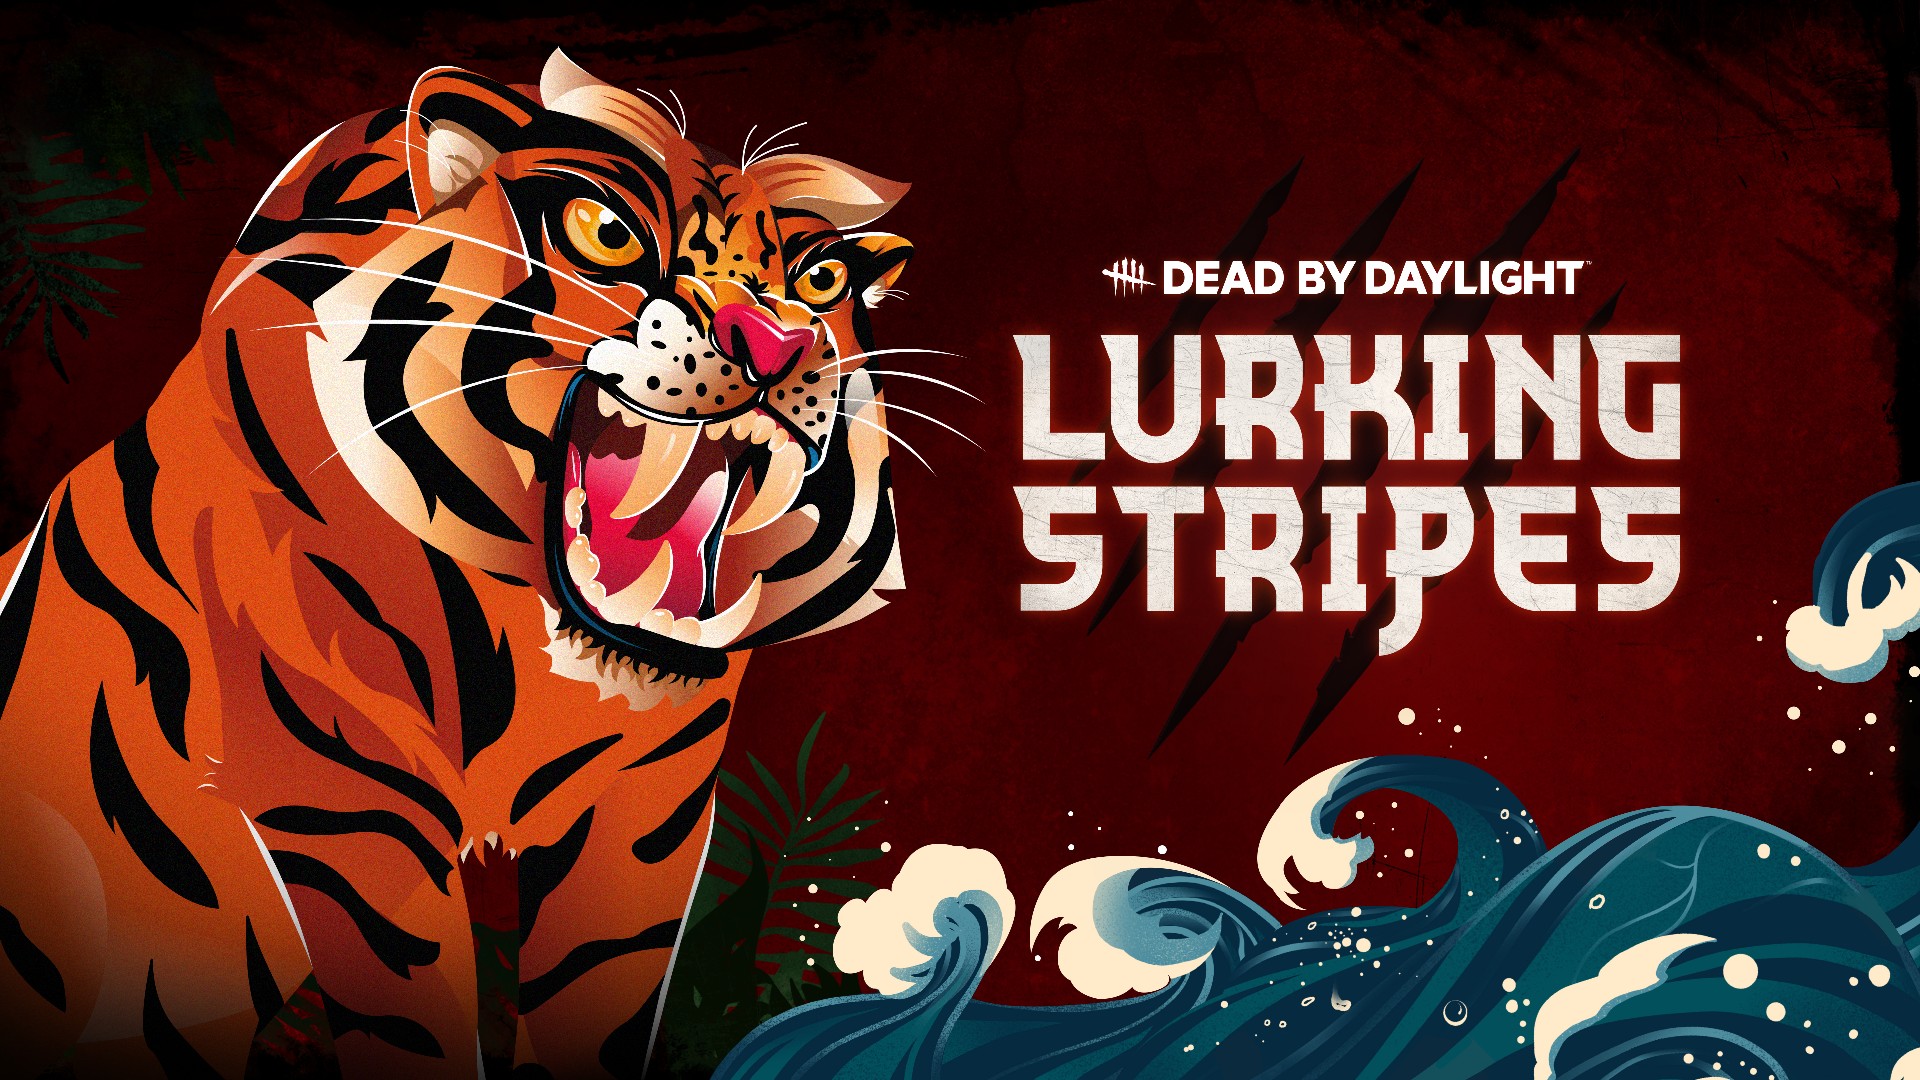 The Lurking Stripes Lunar New Year Event 